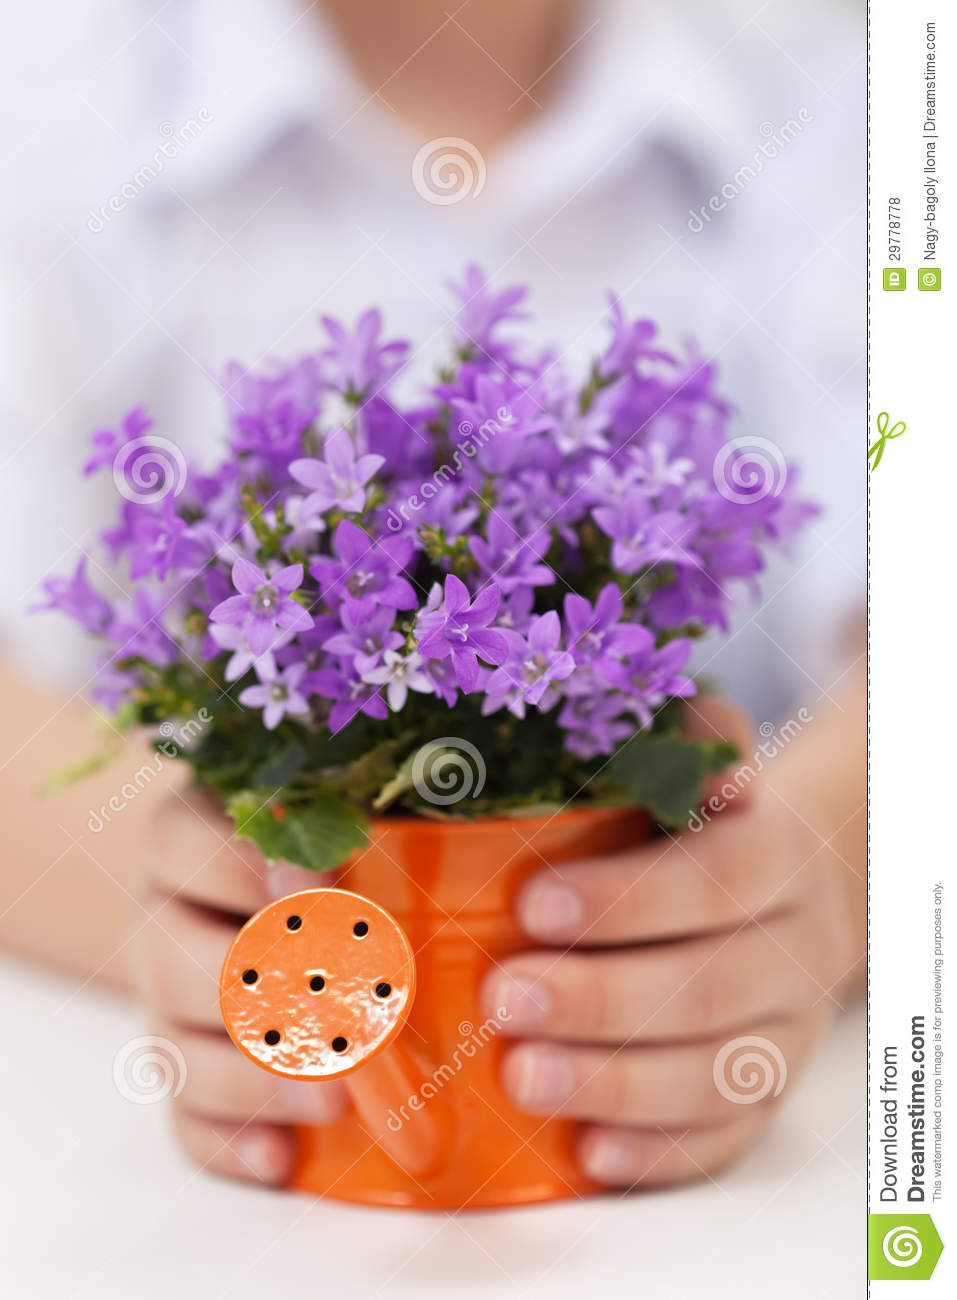 Fuzzy And Warm Spring Concept With Flower In Child Hands   Shallow